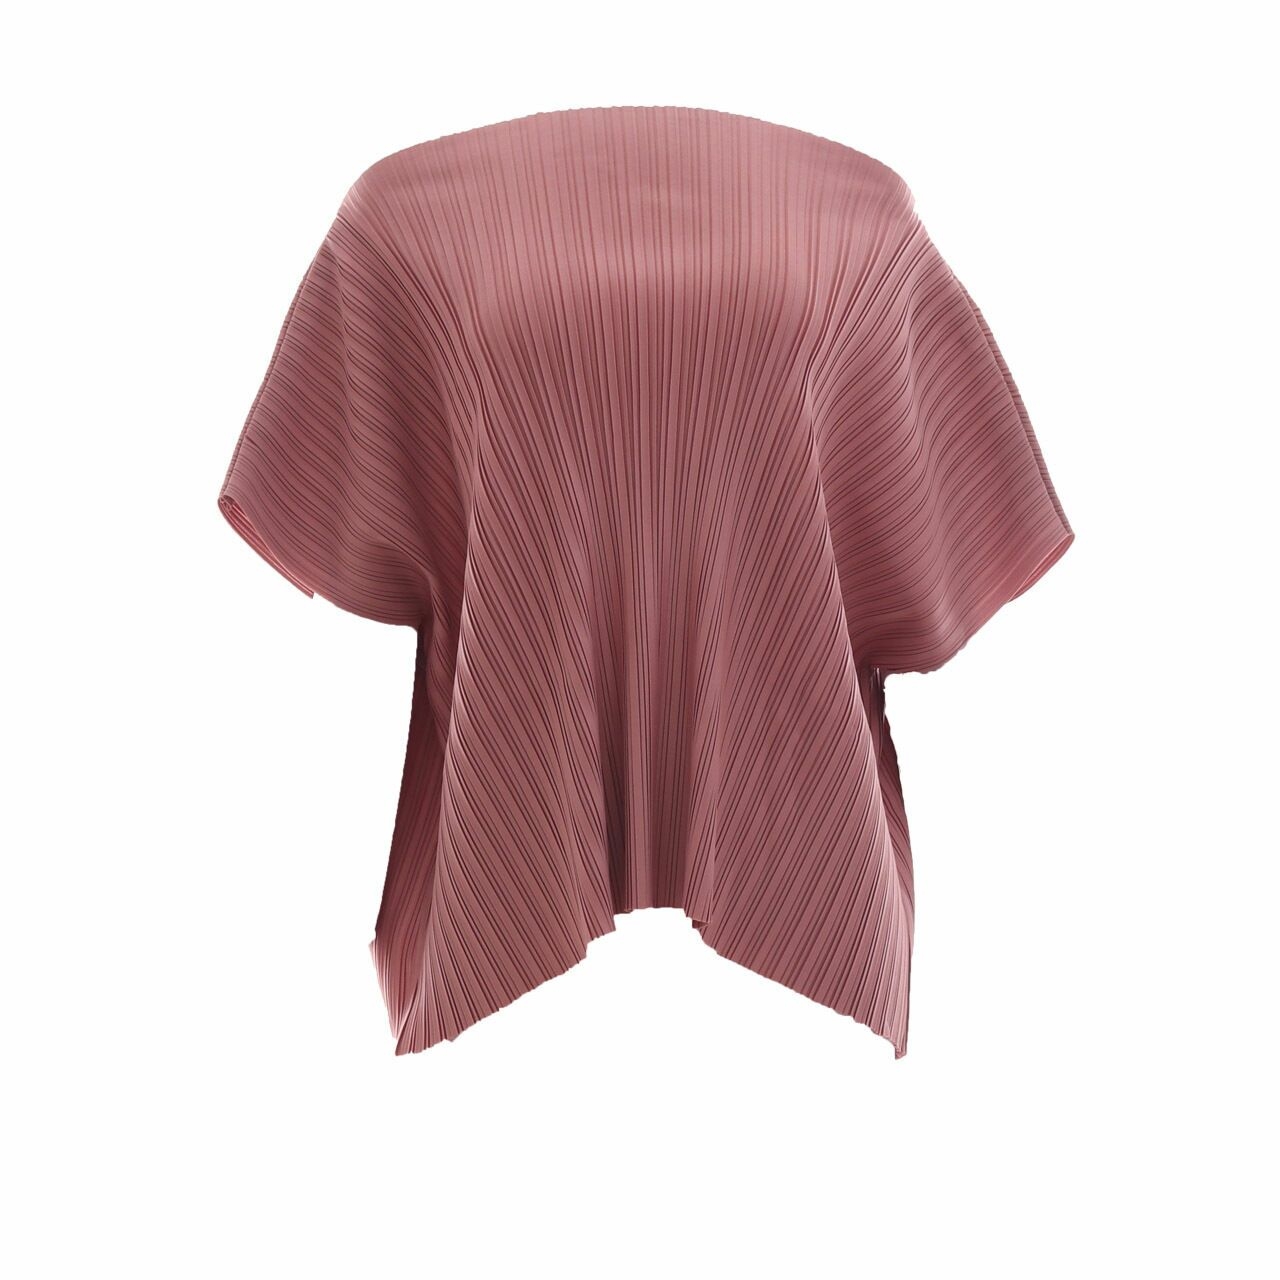 Shop At Velvet Square Pleated Pink Blouse